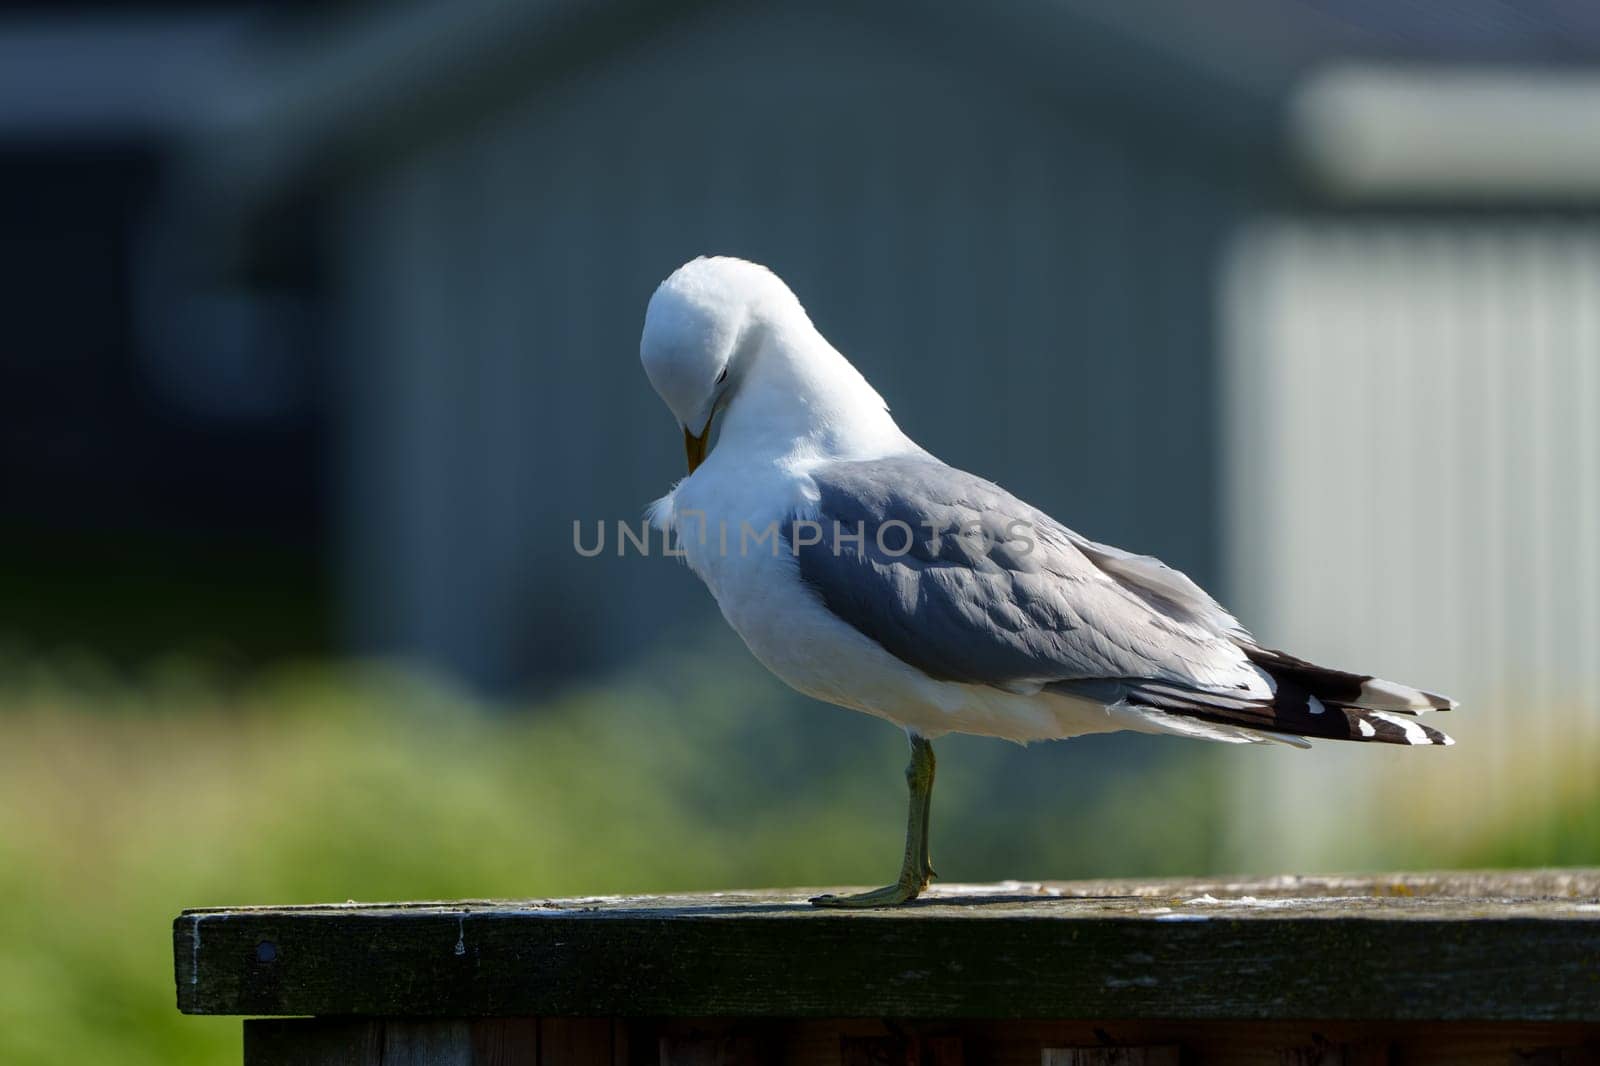 Northern Norwegian Seagull Close-up Shot Featuring Exquisite Feather Details by PhotoTime